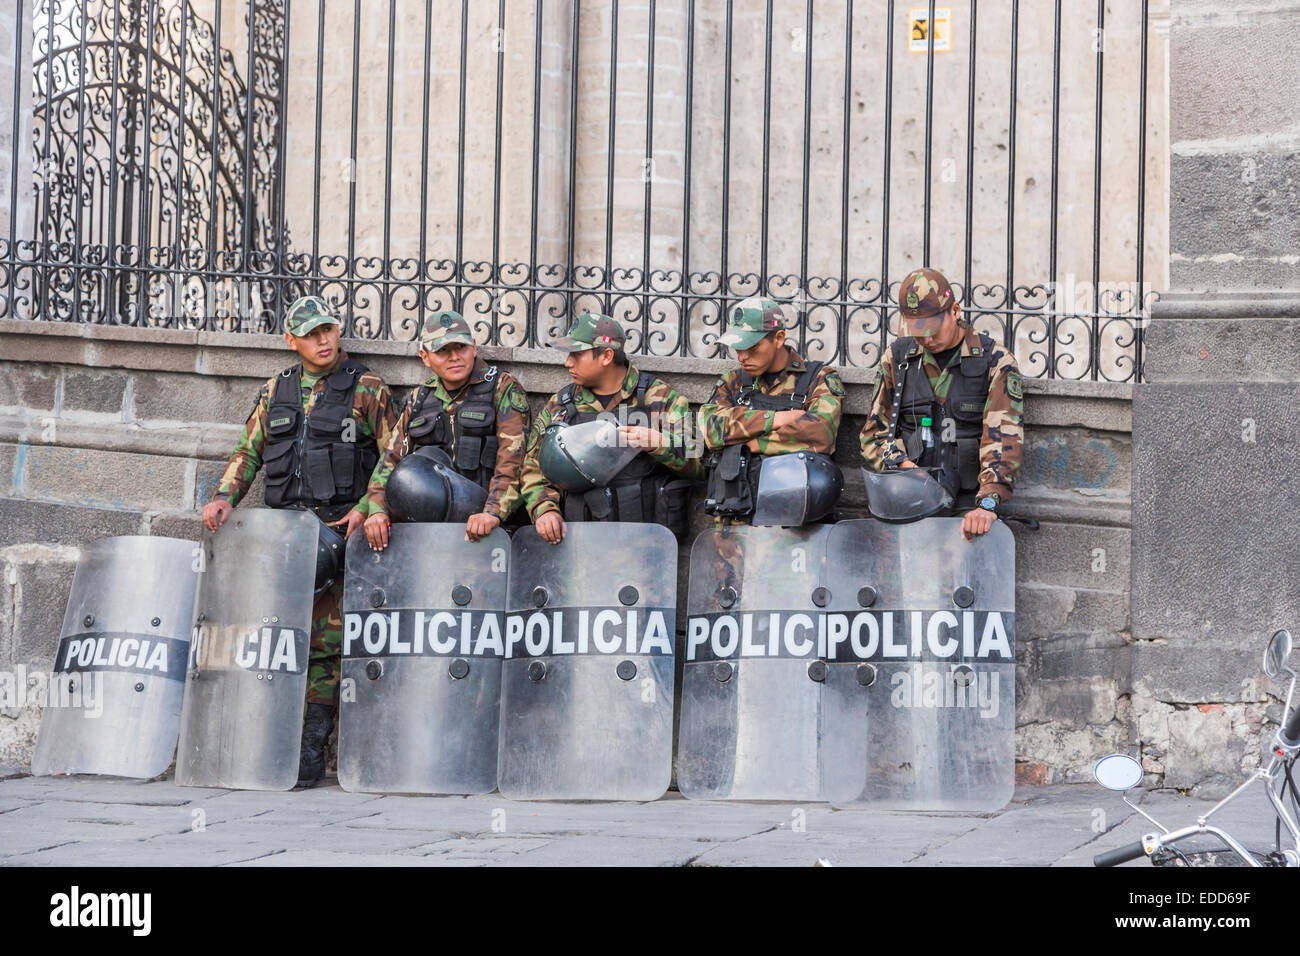 Peruvian riot police wearing camouflage uniform with shields and helmets standing outside Arequipa Cathedral, Plaza de Armas, Arequipa, Peru Stock Photo